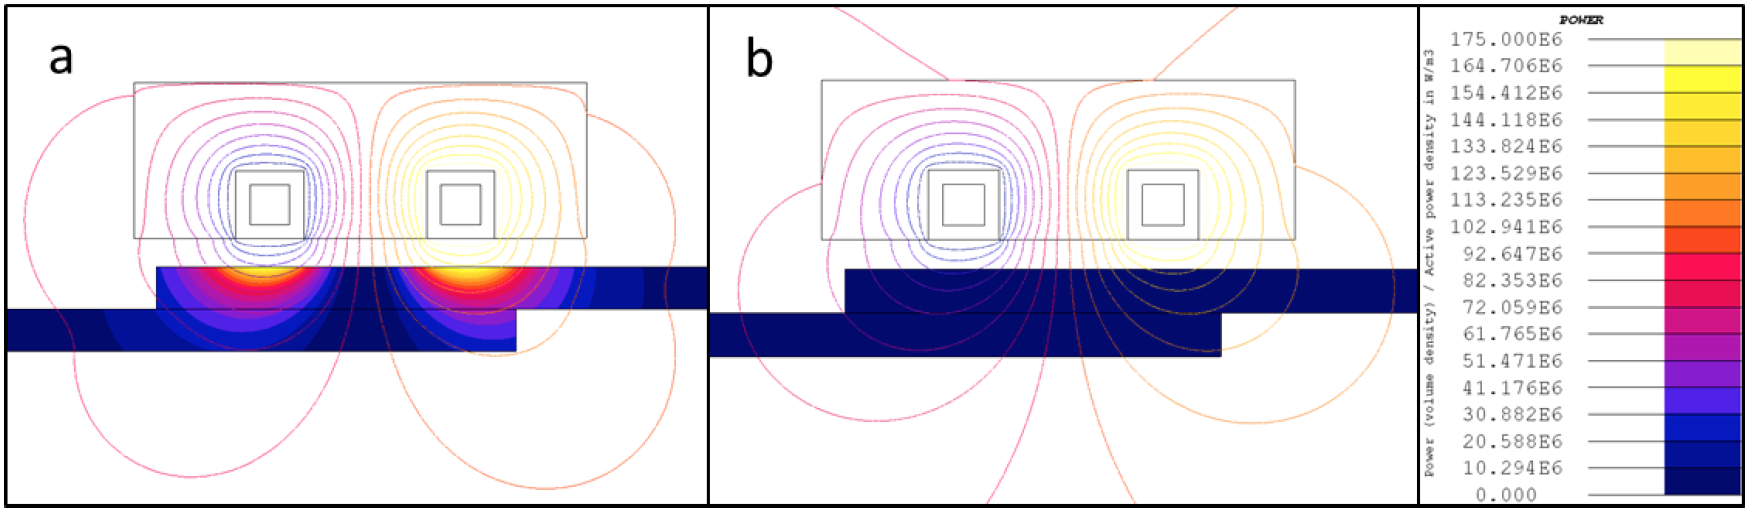 Fluxtrol - Induction Process and Coil Design for Welding of Carbon Fiber Reinforced Thermoplastics - Figure 6: Power density and magnetic field lines for resistivity in parallel direction (a) and perpendicular direction (b) at 2 MHz.